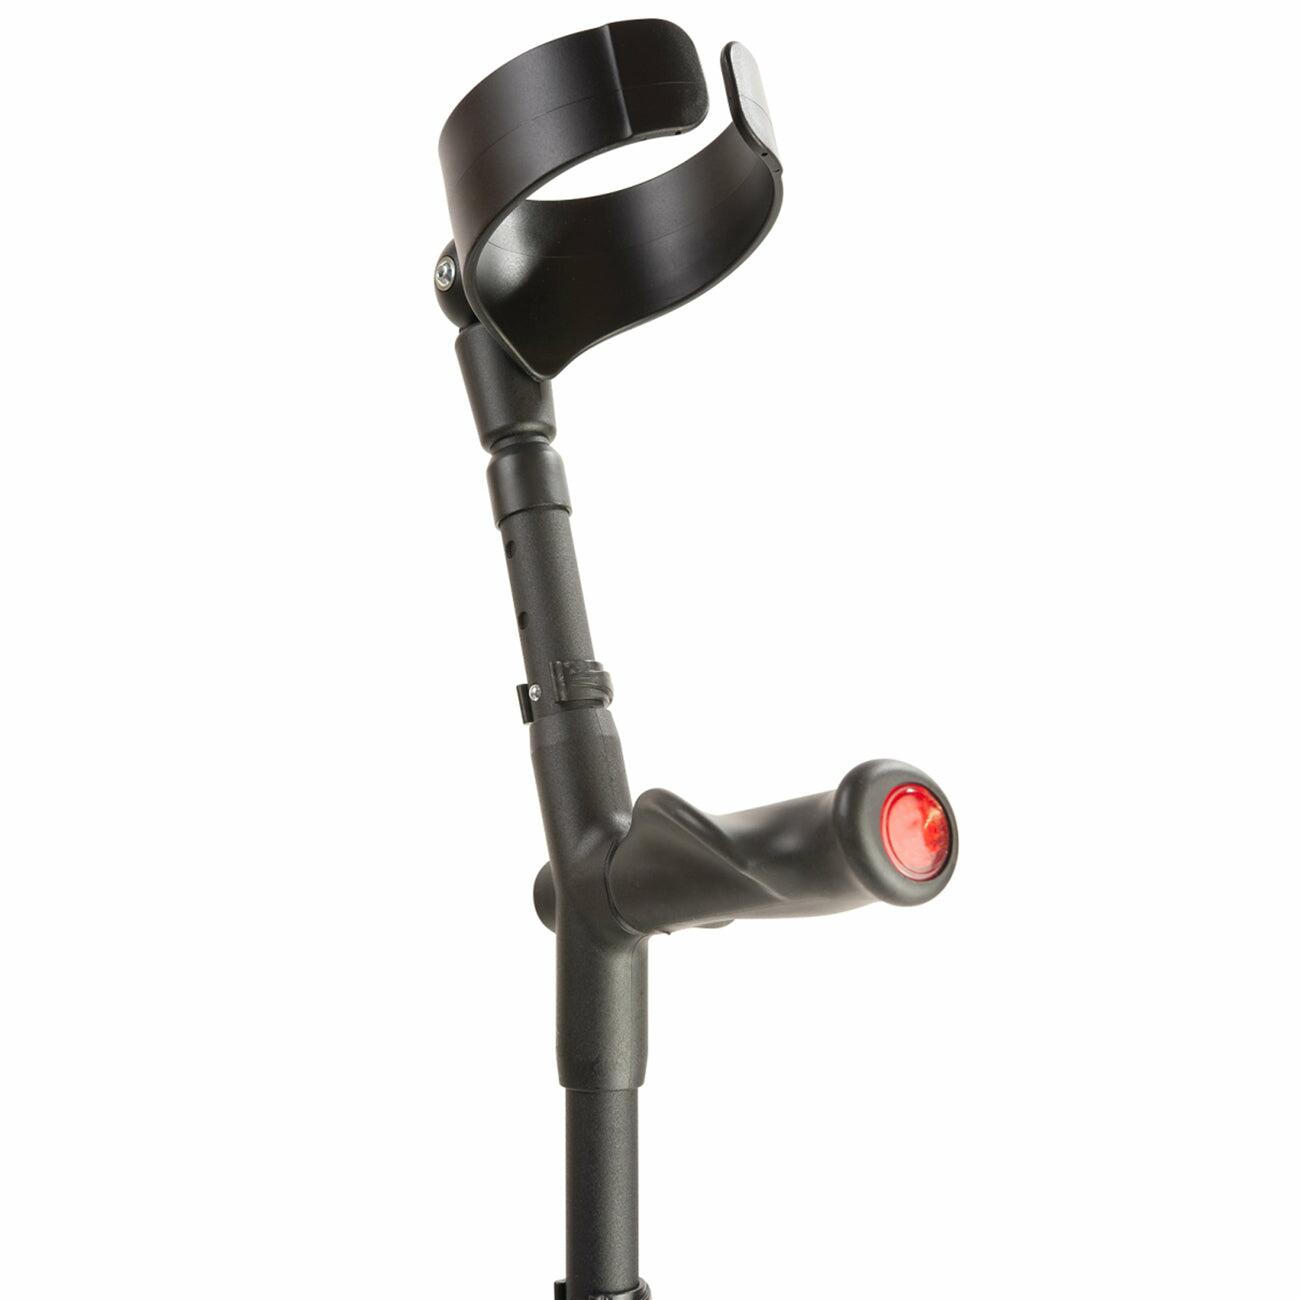 Comfort grip handle and closed cuff of the Flexyfoot Comfort Grip Double Adjustable Crutch